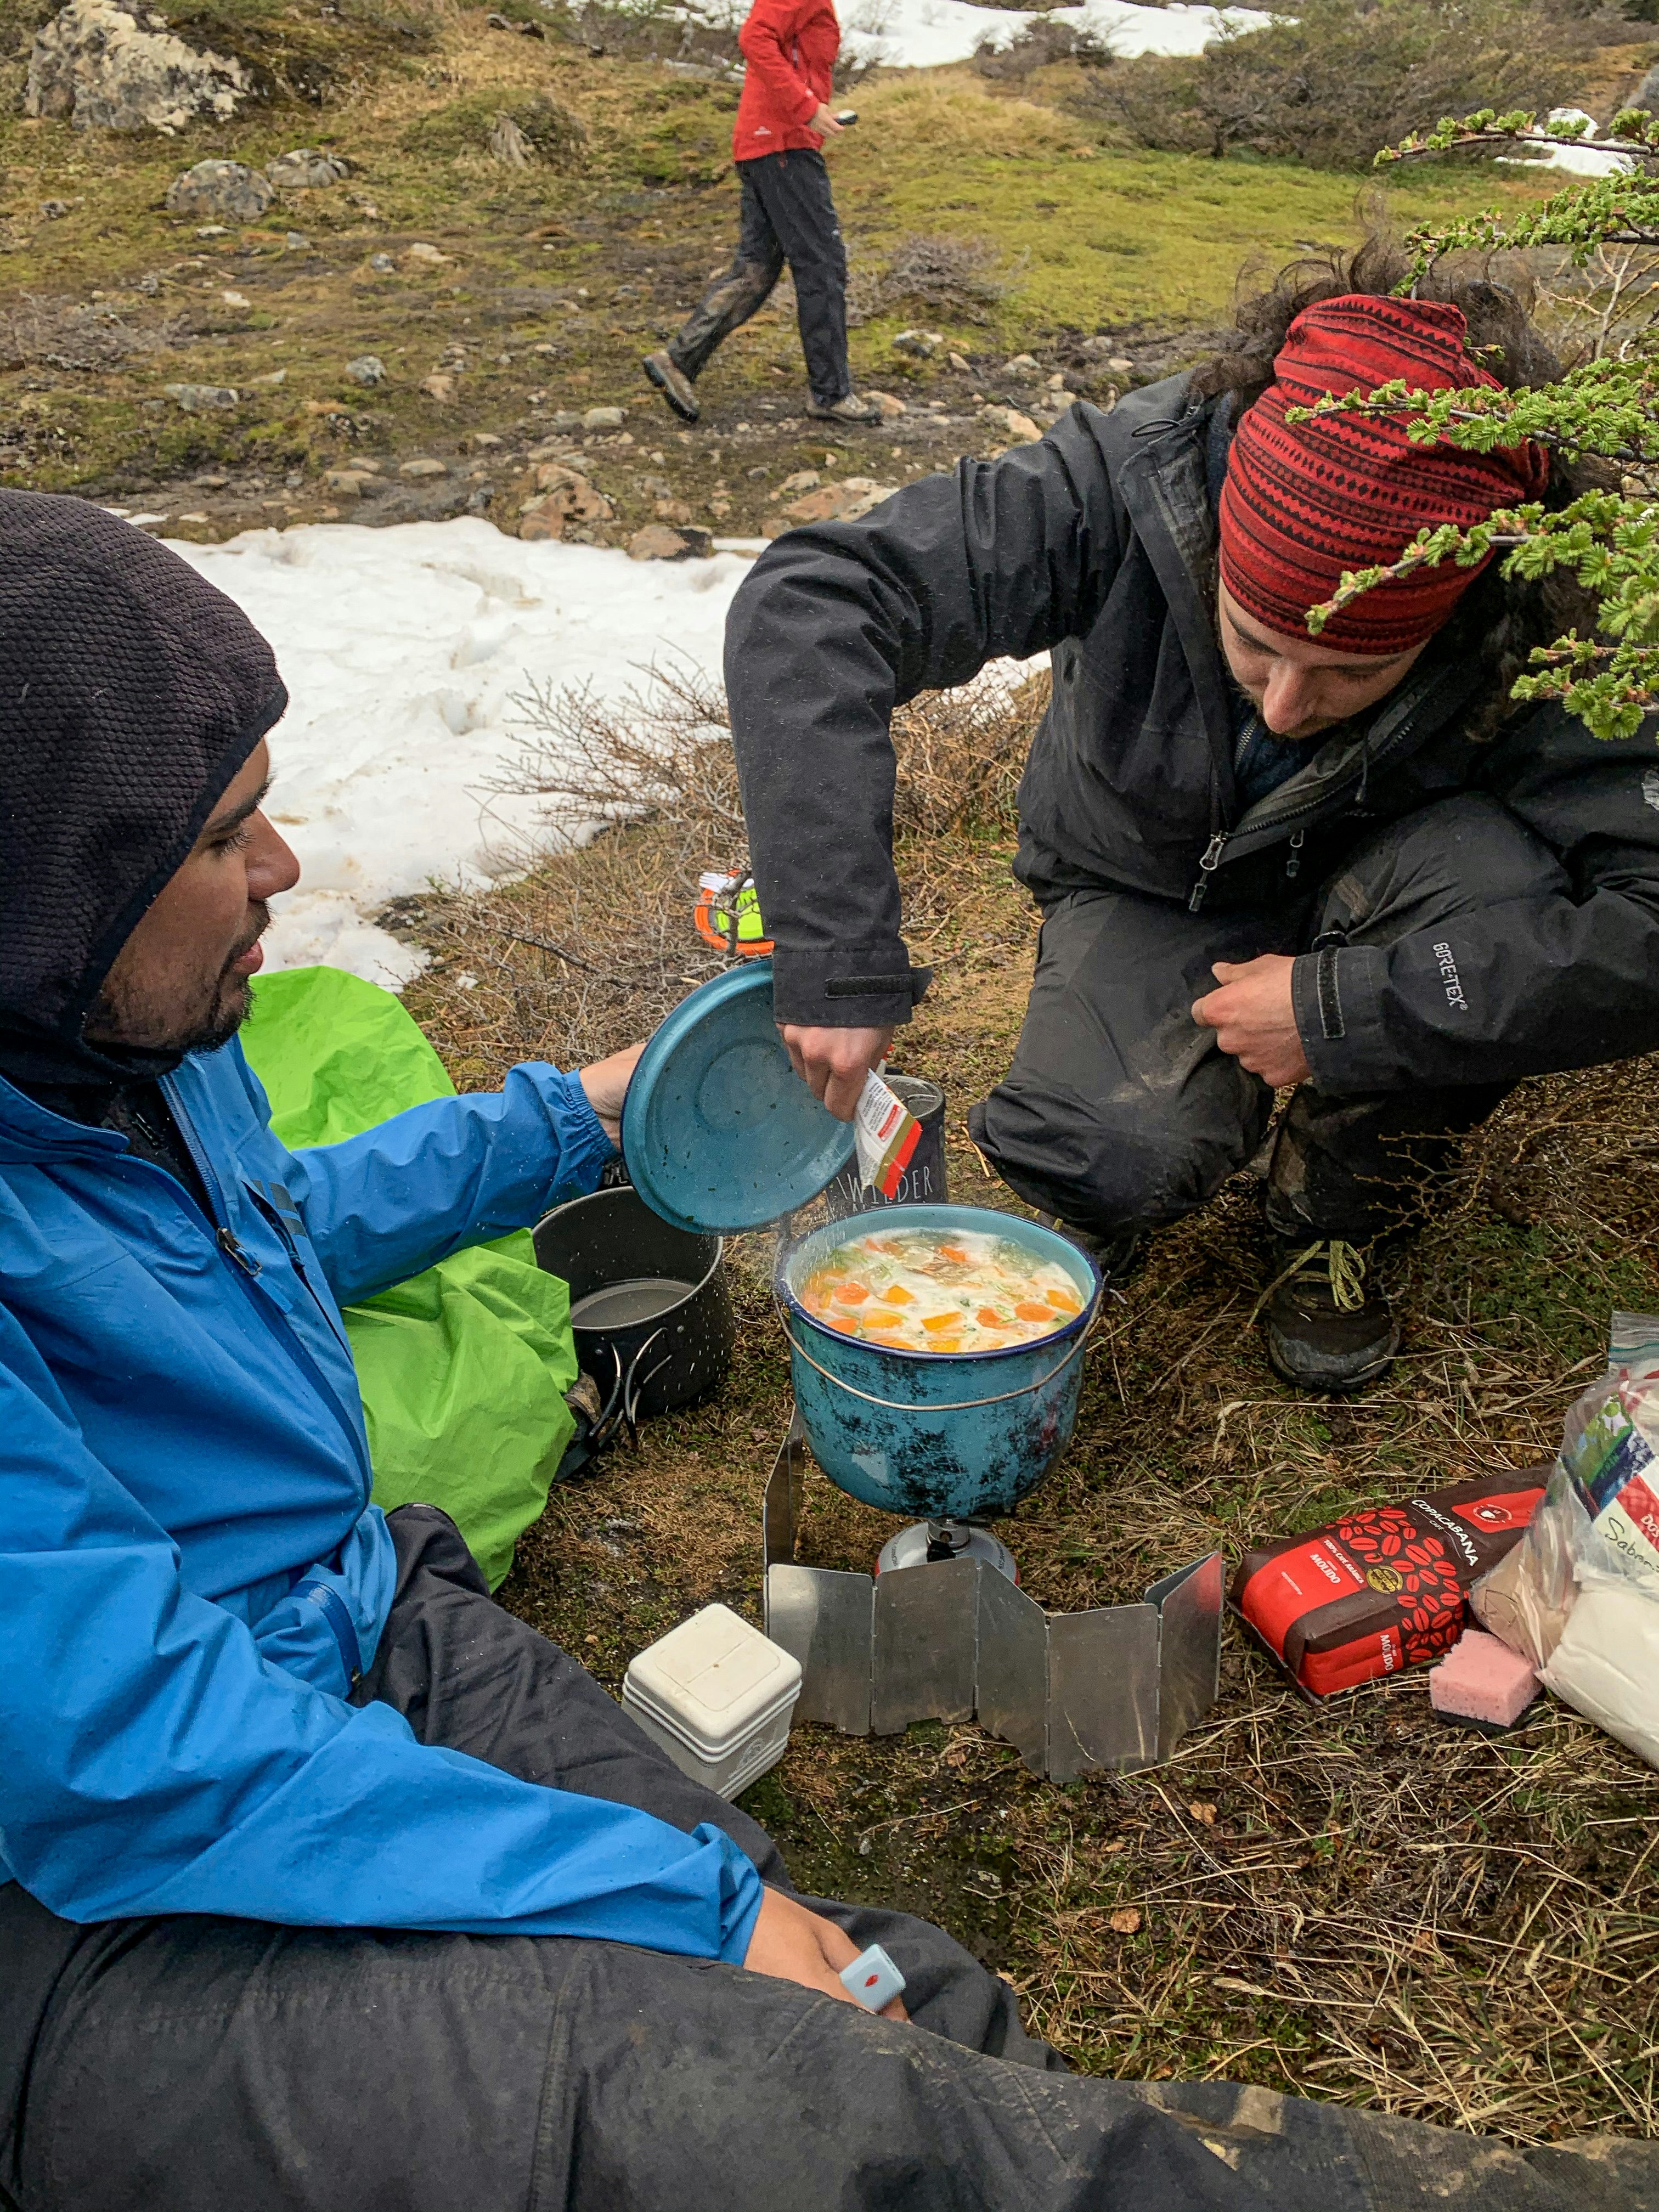 A campsite scene; two members of the trekking team are cooking a stew in a large saucepan on a camping stove.